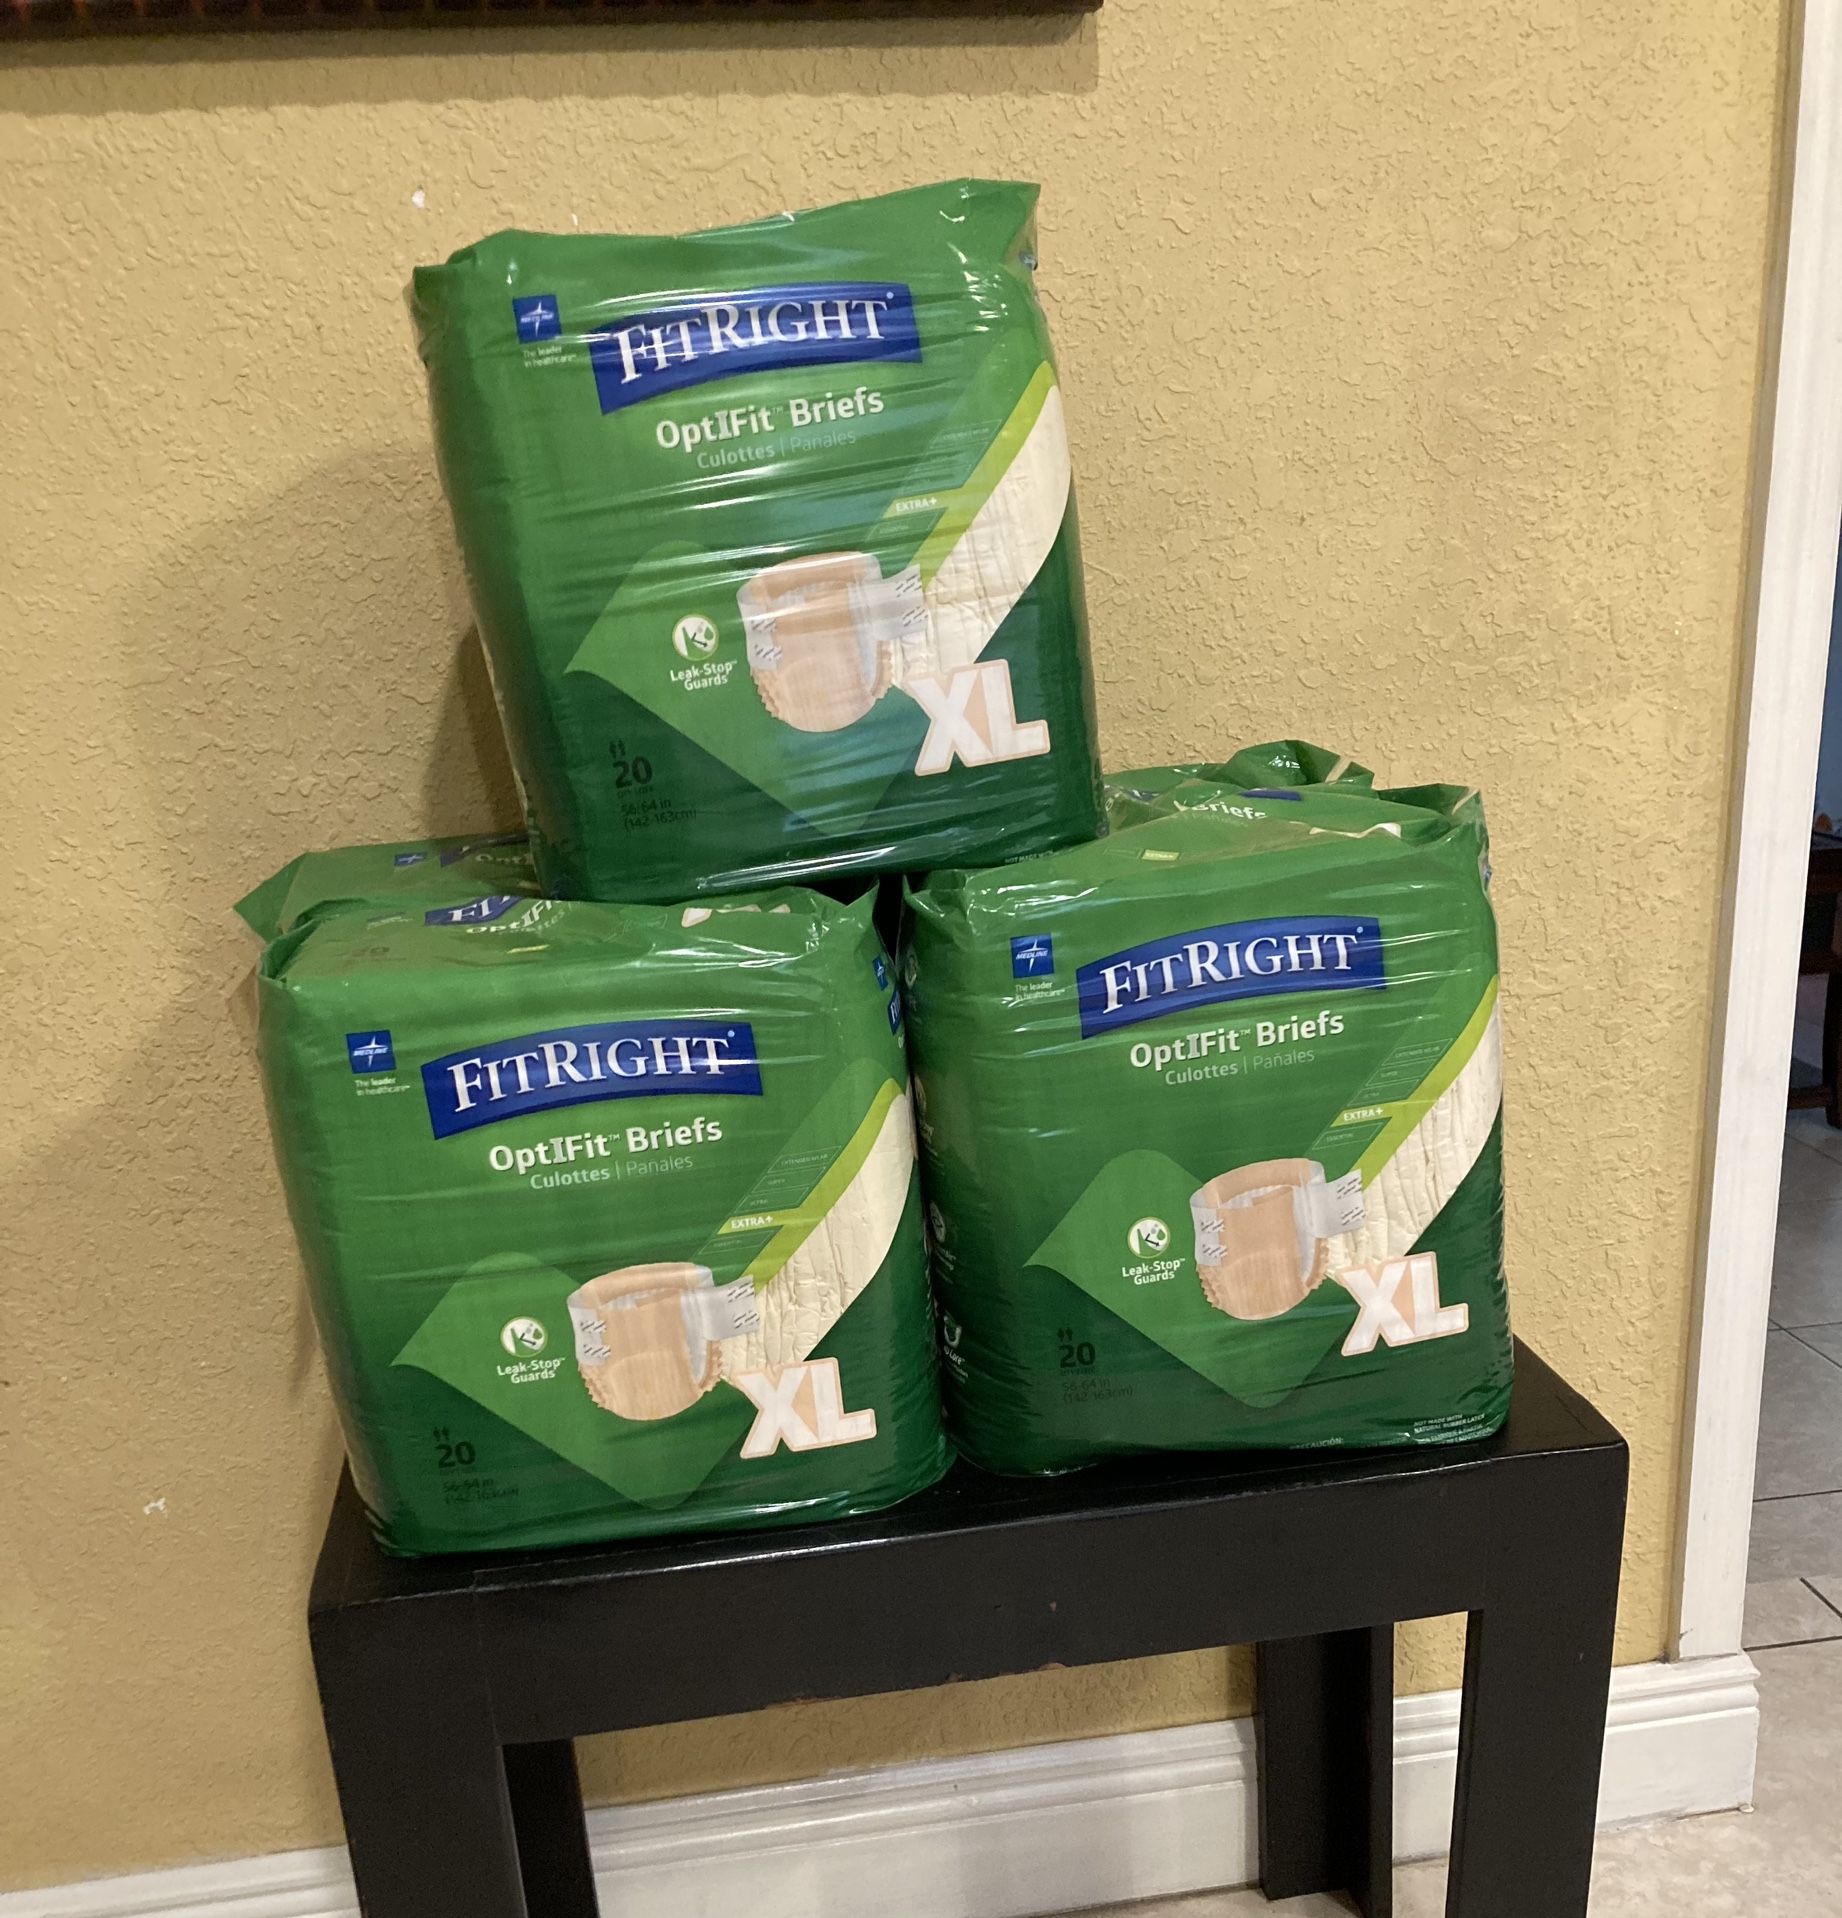 BRAND NEW SET OF 5…ADULT DIAPERS… FitRight OptiFit Briefs…SIZE XL… SET OF 5 FOR $55